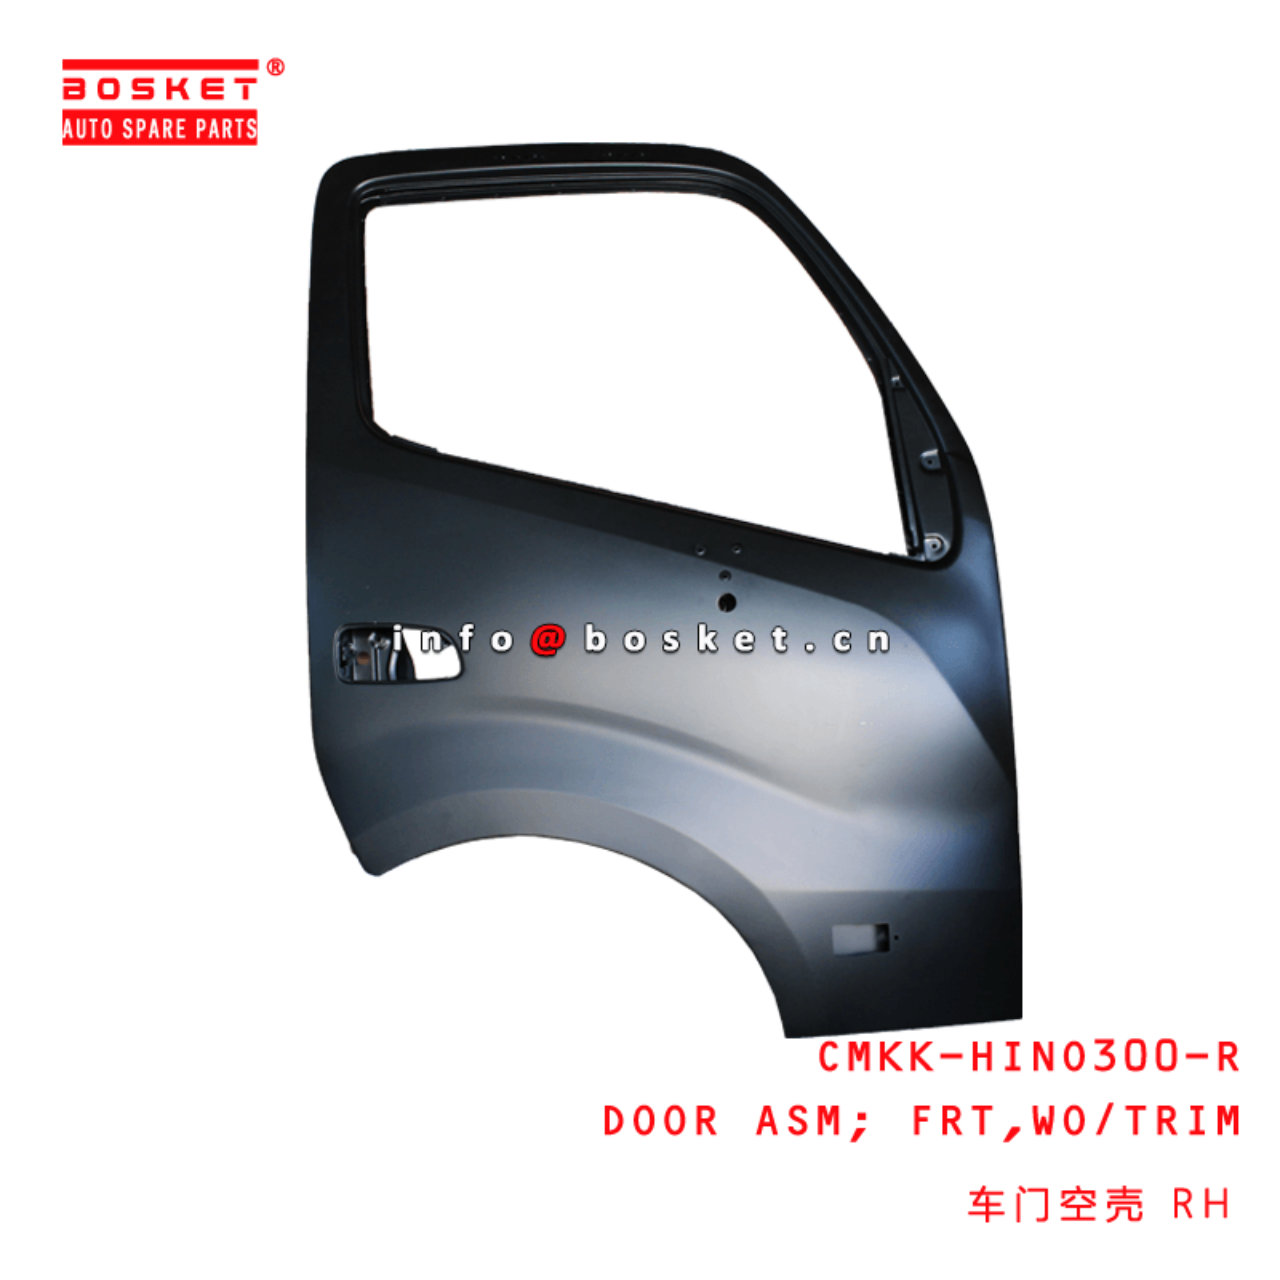 CMKK-HINO300-R Trim Front Door Assembly Without Suitable For HINO 300 